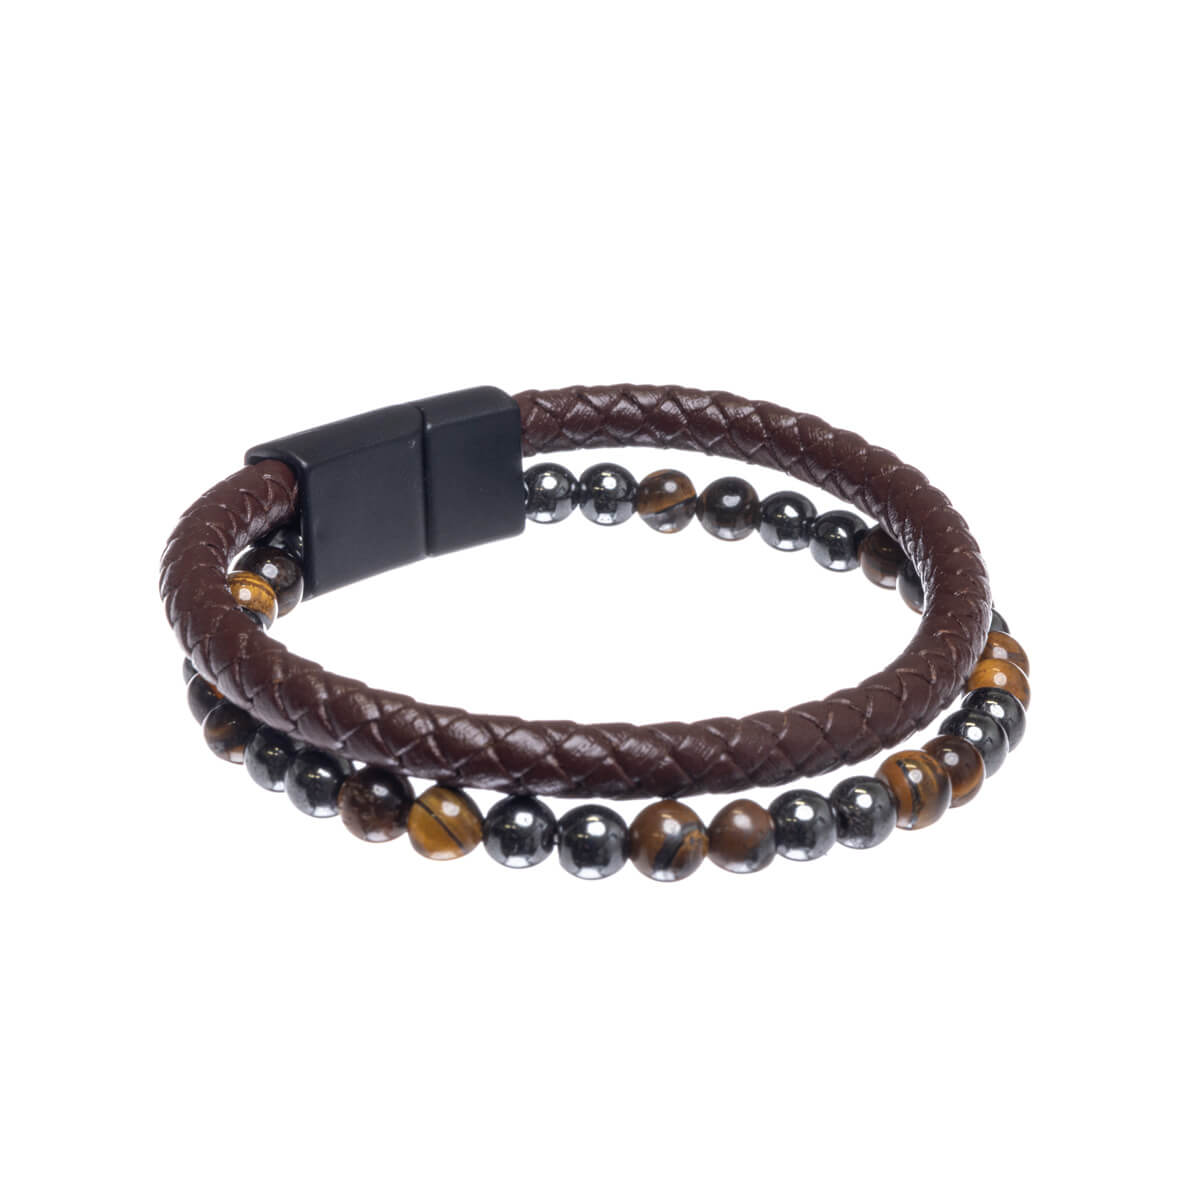 Double row bracelet with beads (Steel 316L)